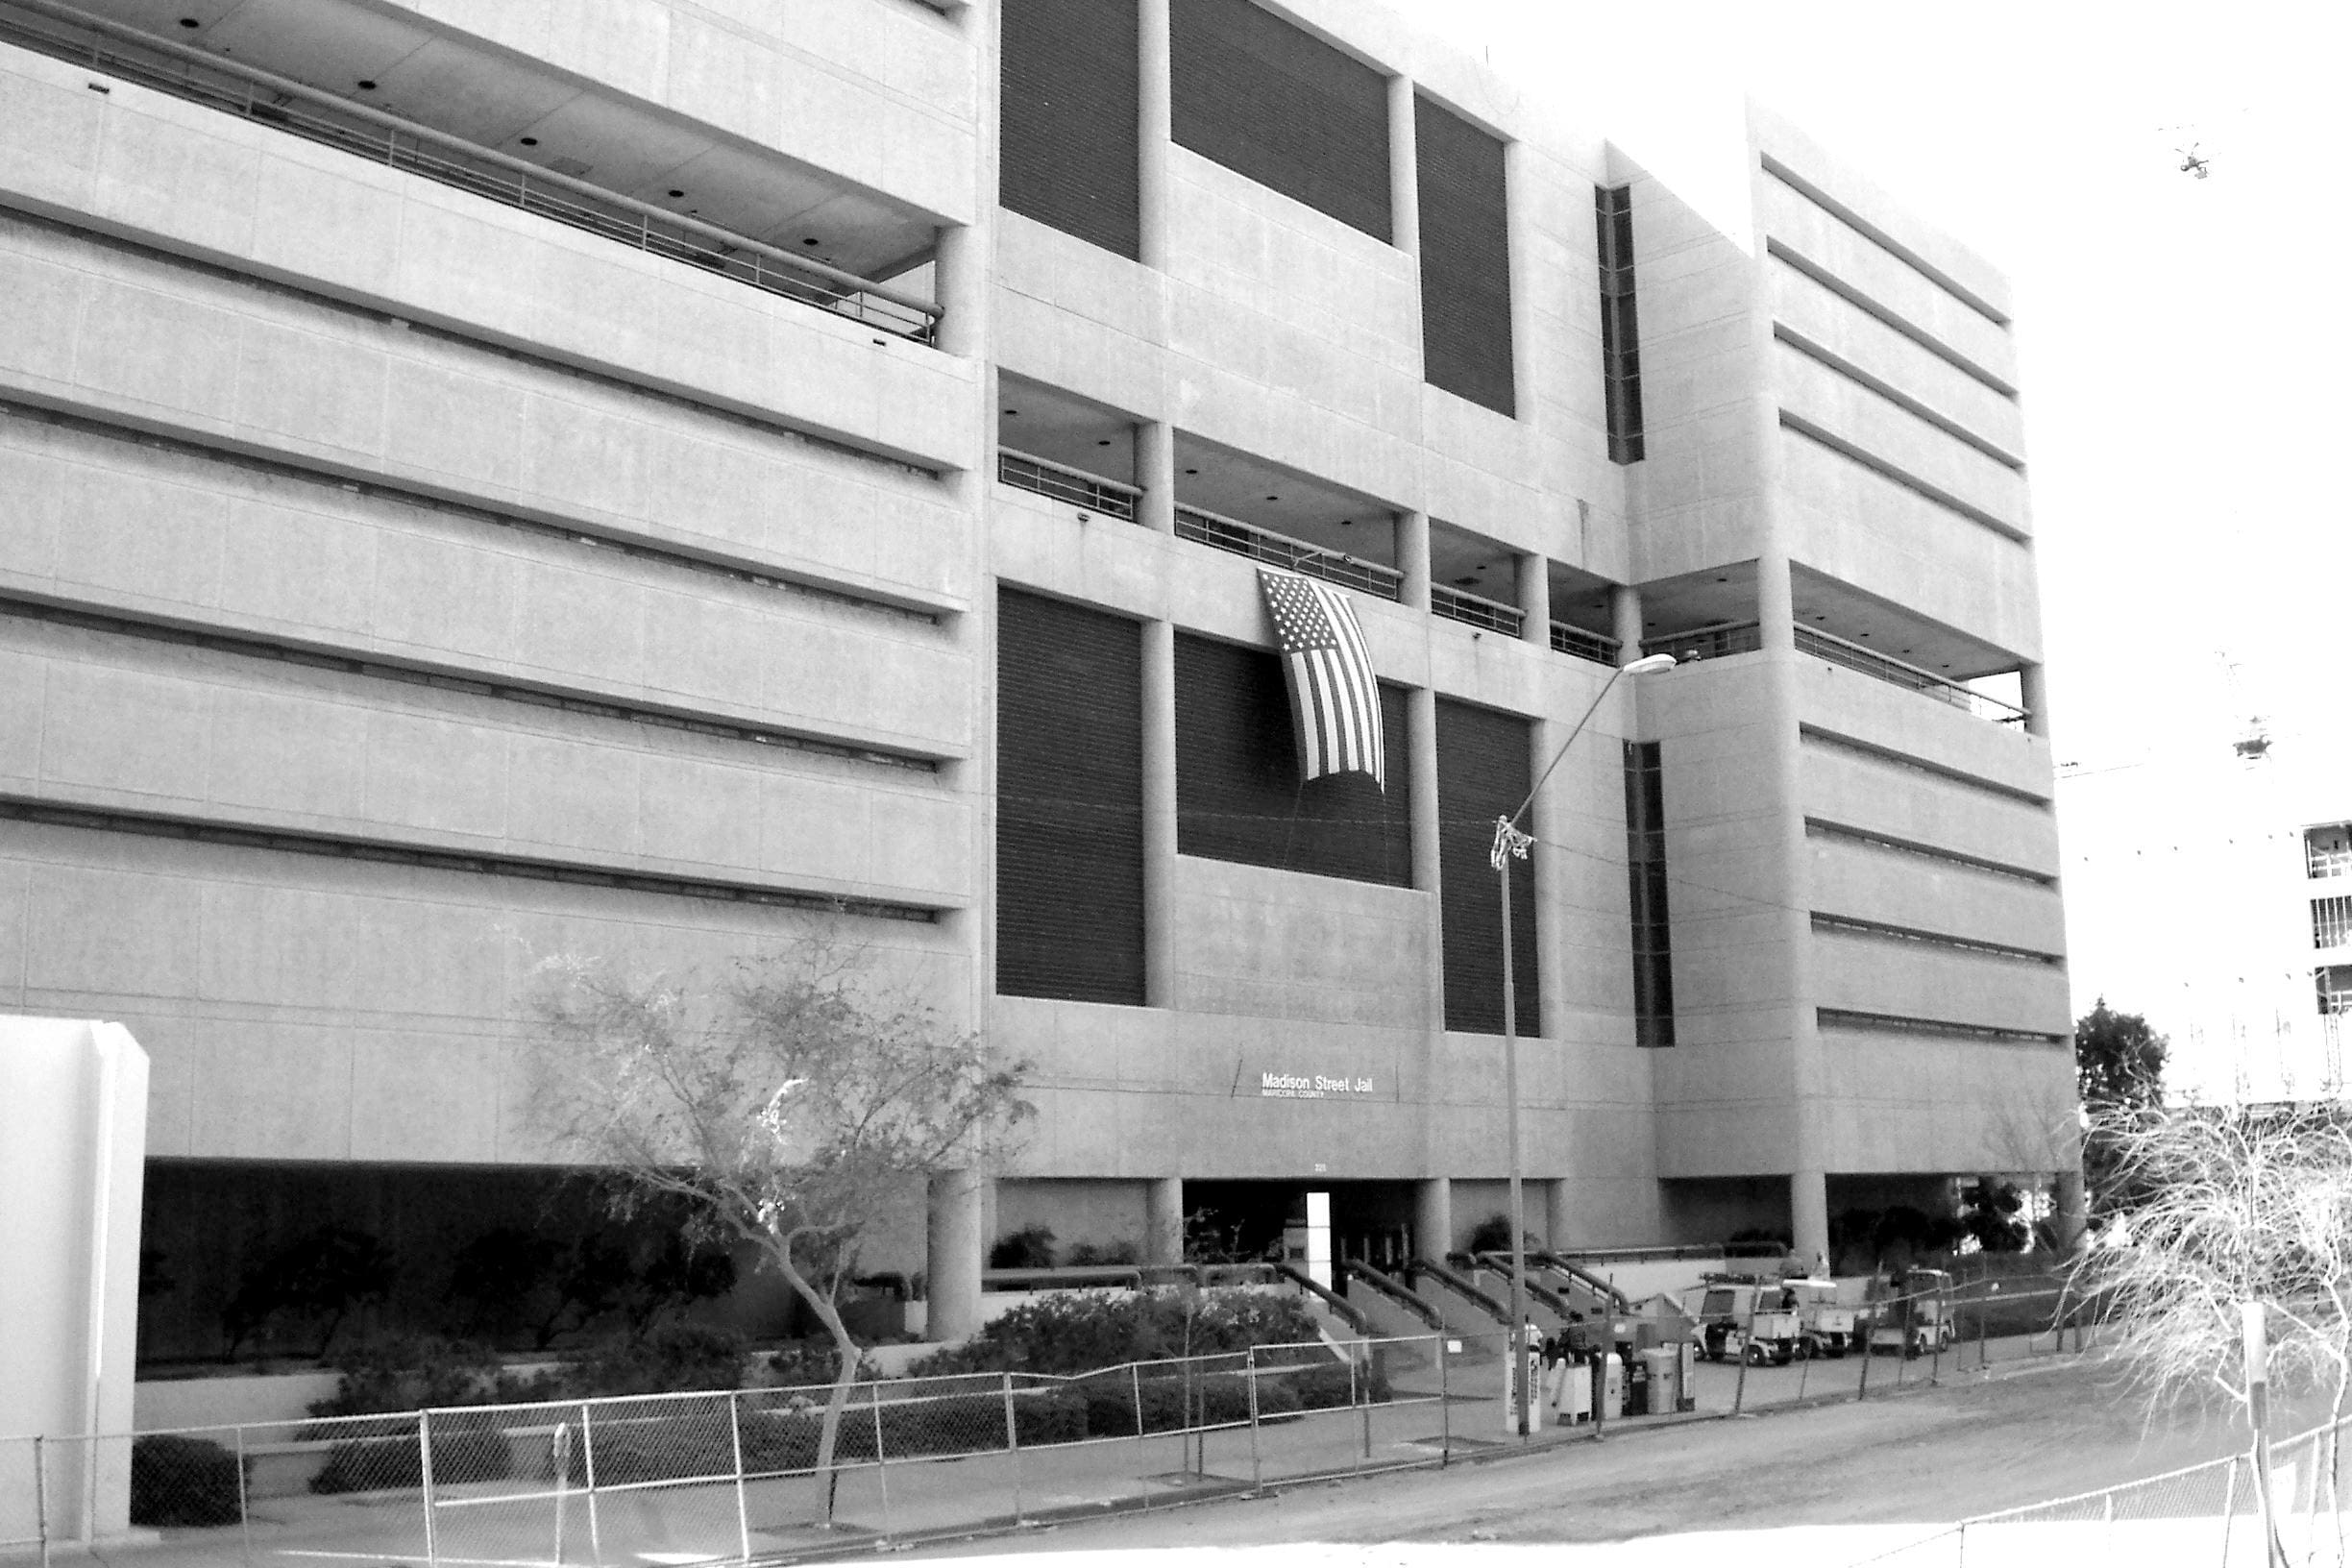 A black and white photo of a modern multi-story building about Sun Valley Construction with an American flag hanging on its facade, and a few trees and benches visible in front.